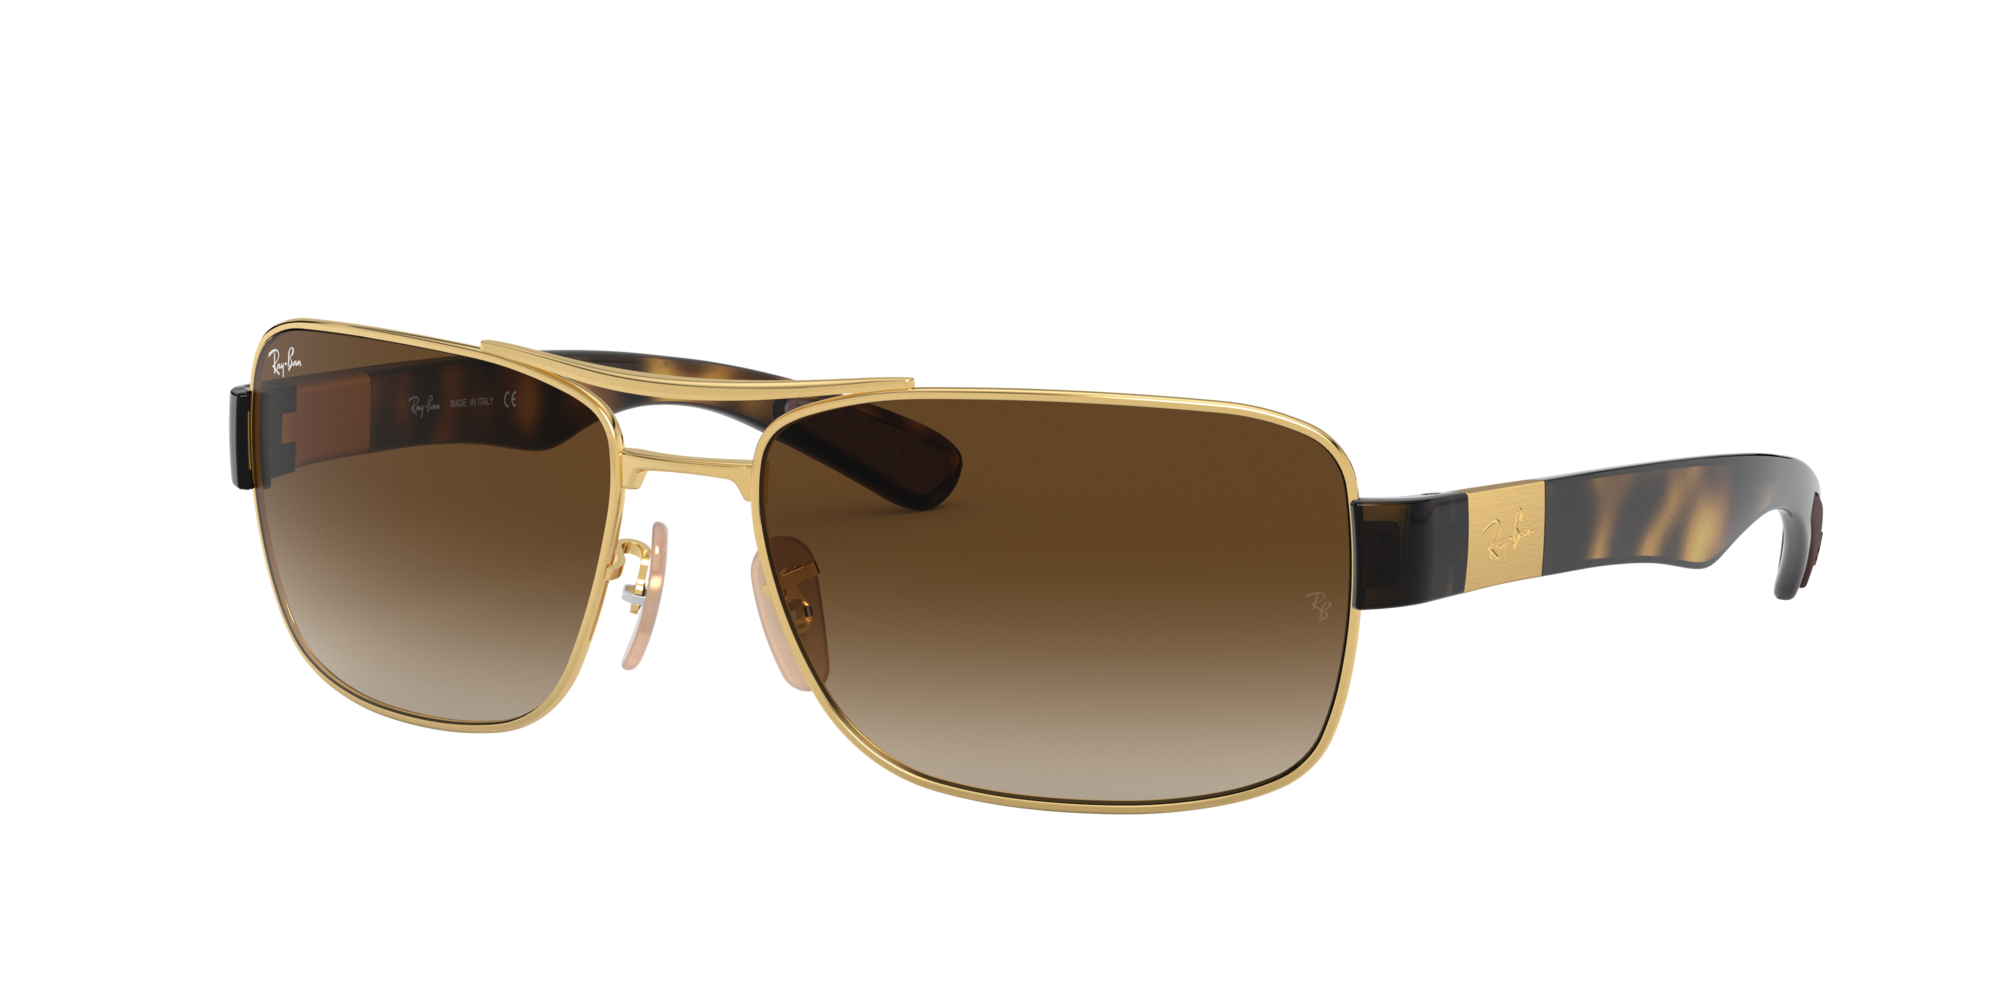 Ray-Ban RB3522 61 Brown Gradient \u0026 Gold 